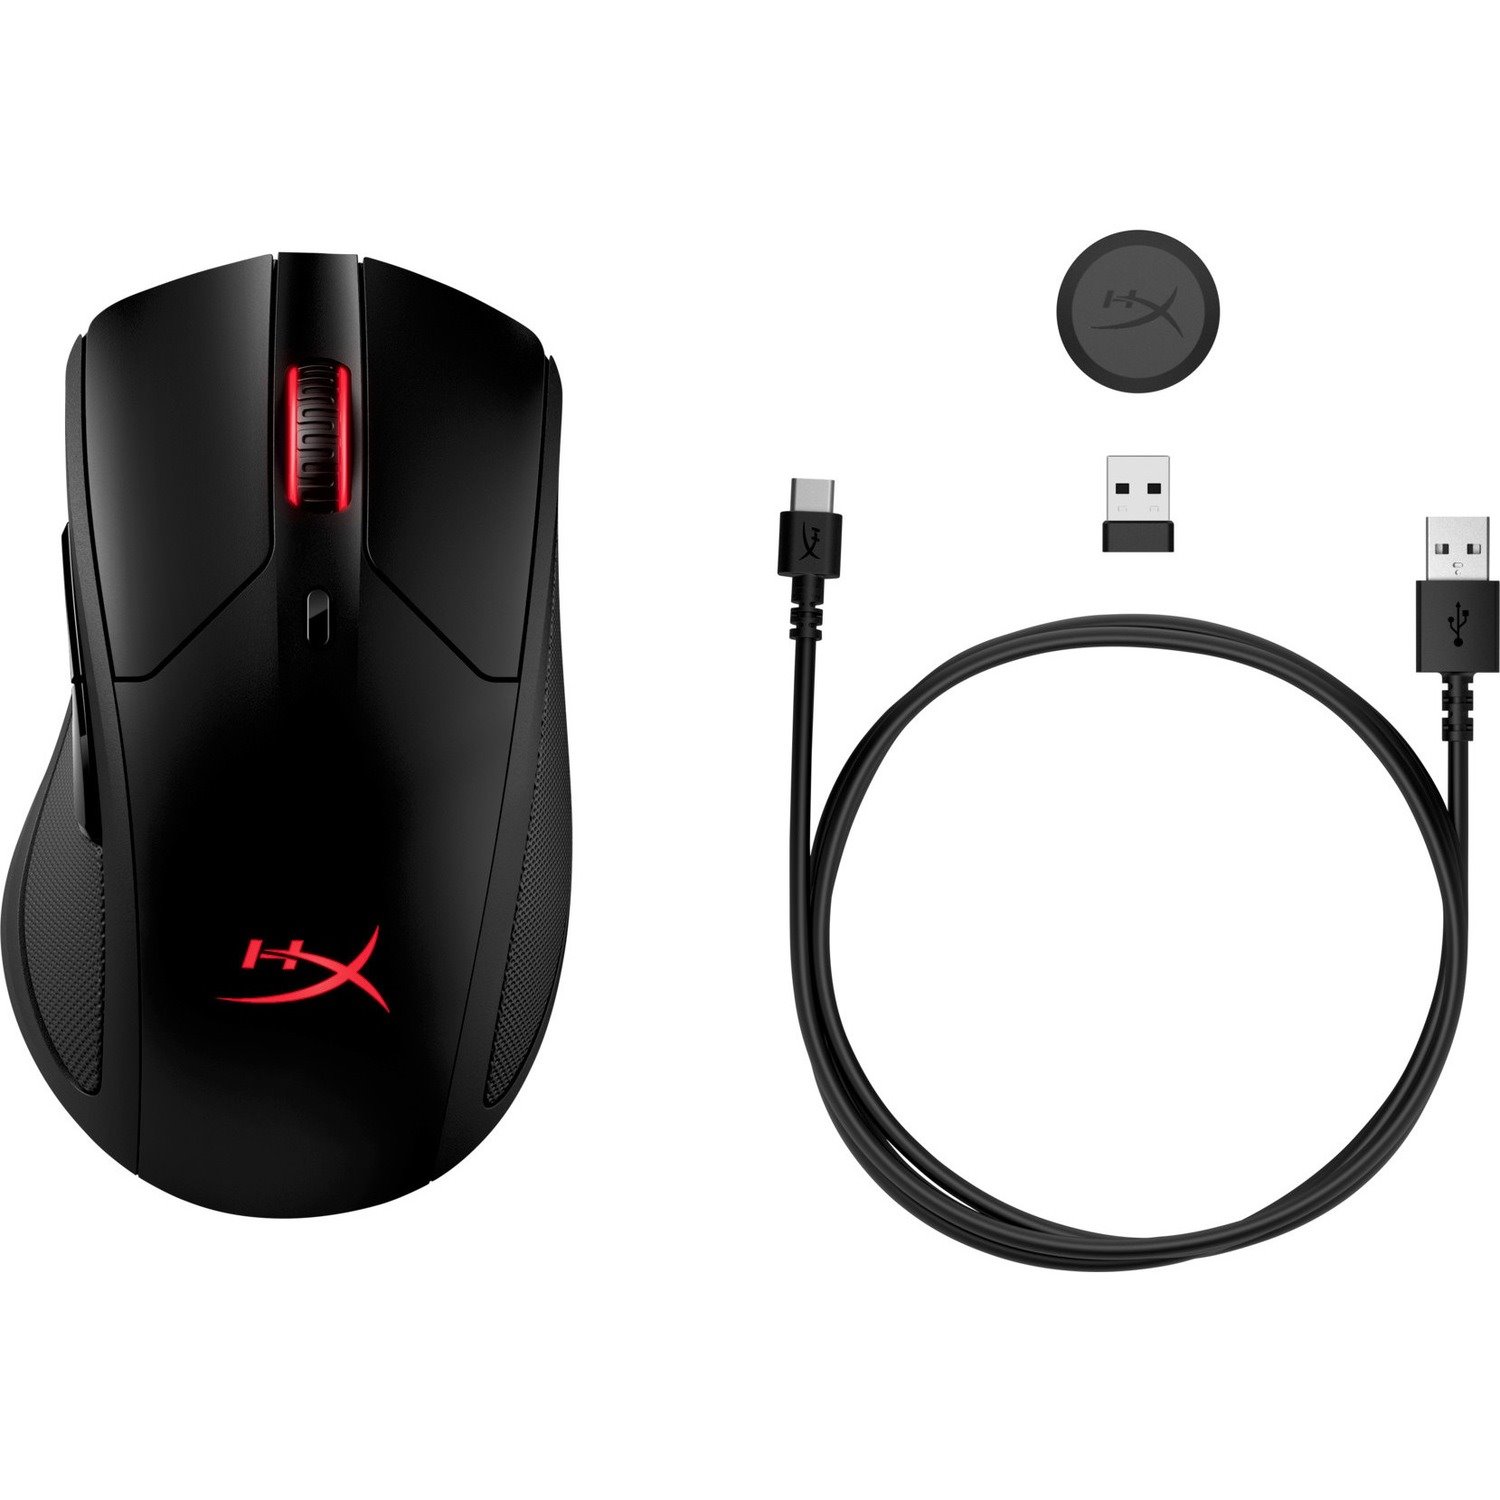 HyperX Pulsefire Dart Gaming Mouse - Radio Frequency - USB - Optical - 6 Button(s) - 6 Programmable Button(s) - Black